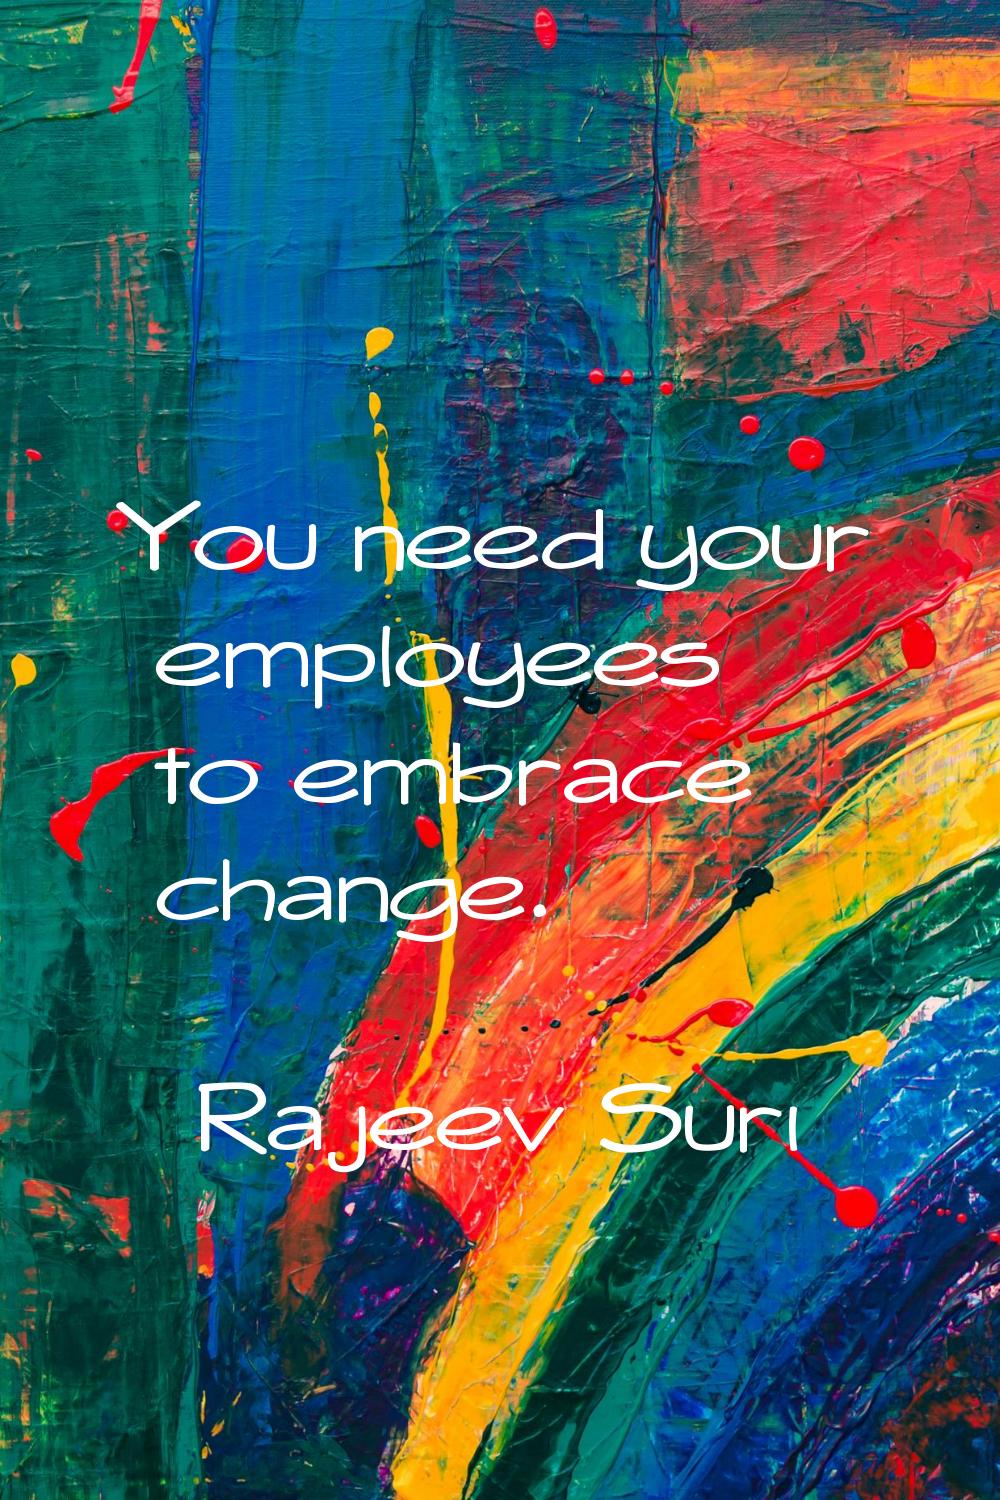 You need your employees to embrace change.